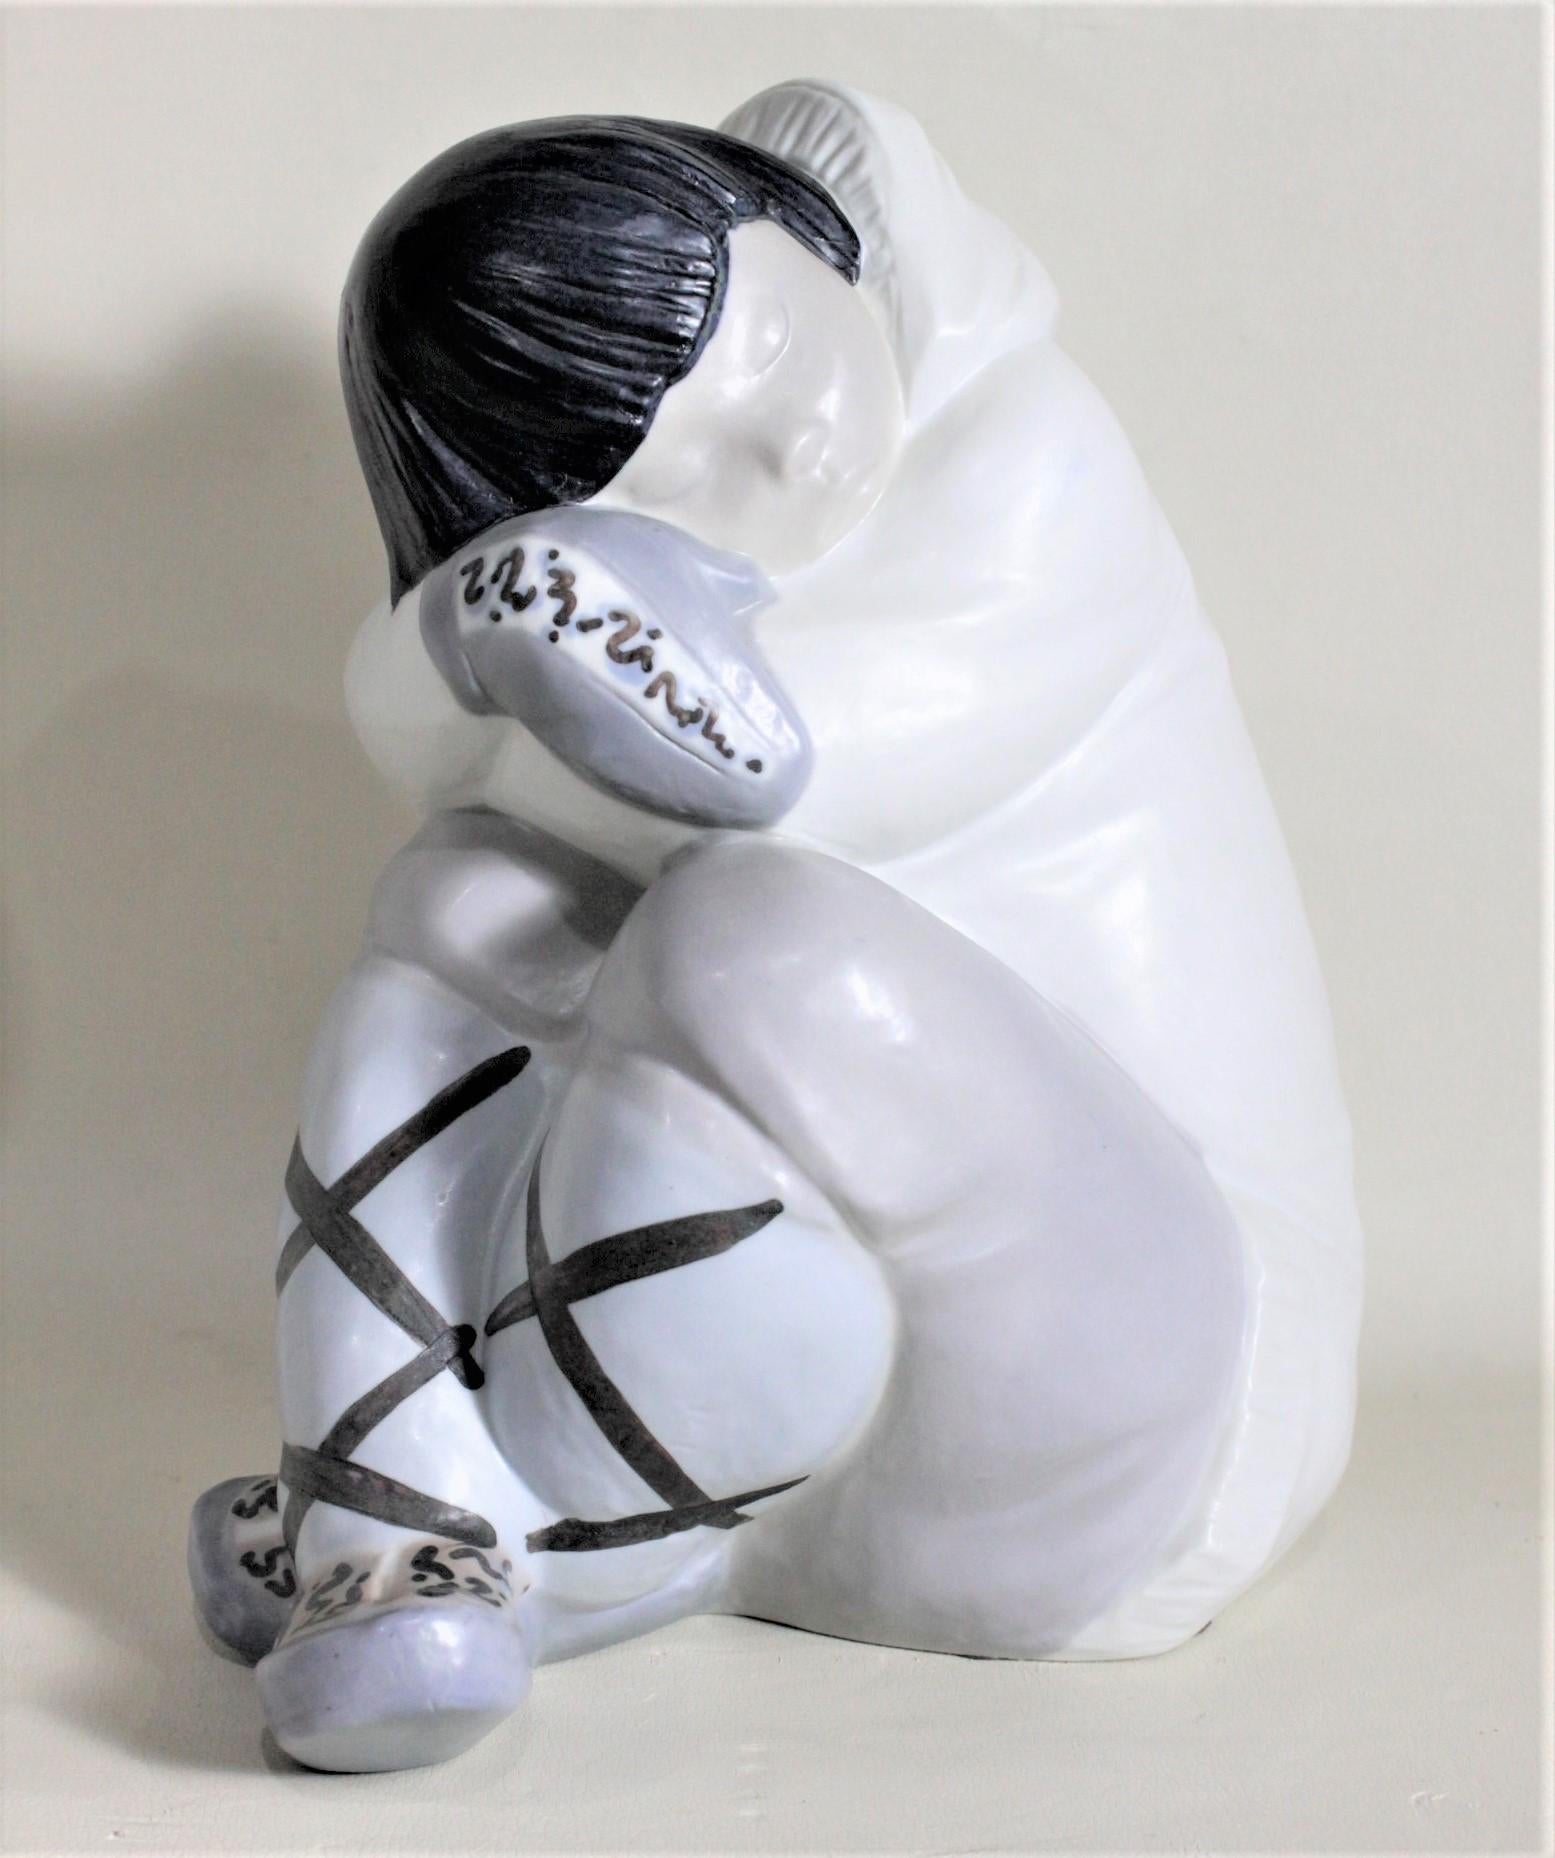 This very large hand painted porcelain figurine was made by the renowned Llladro company of Spain in circa 1985. The figurine depicts a young Inuit boy crouched with his head in his arms for a nap or contemplation. The hand painted details are done